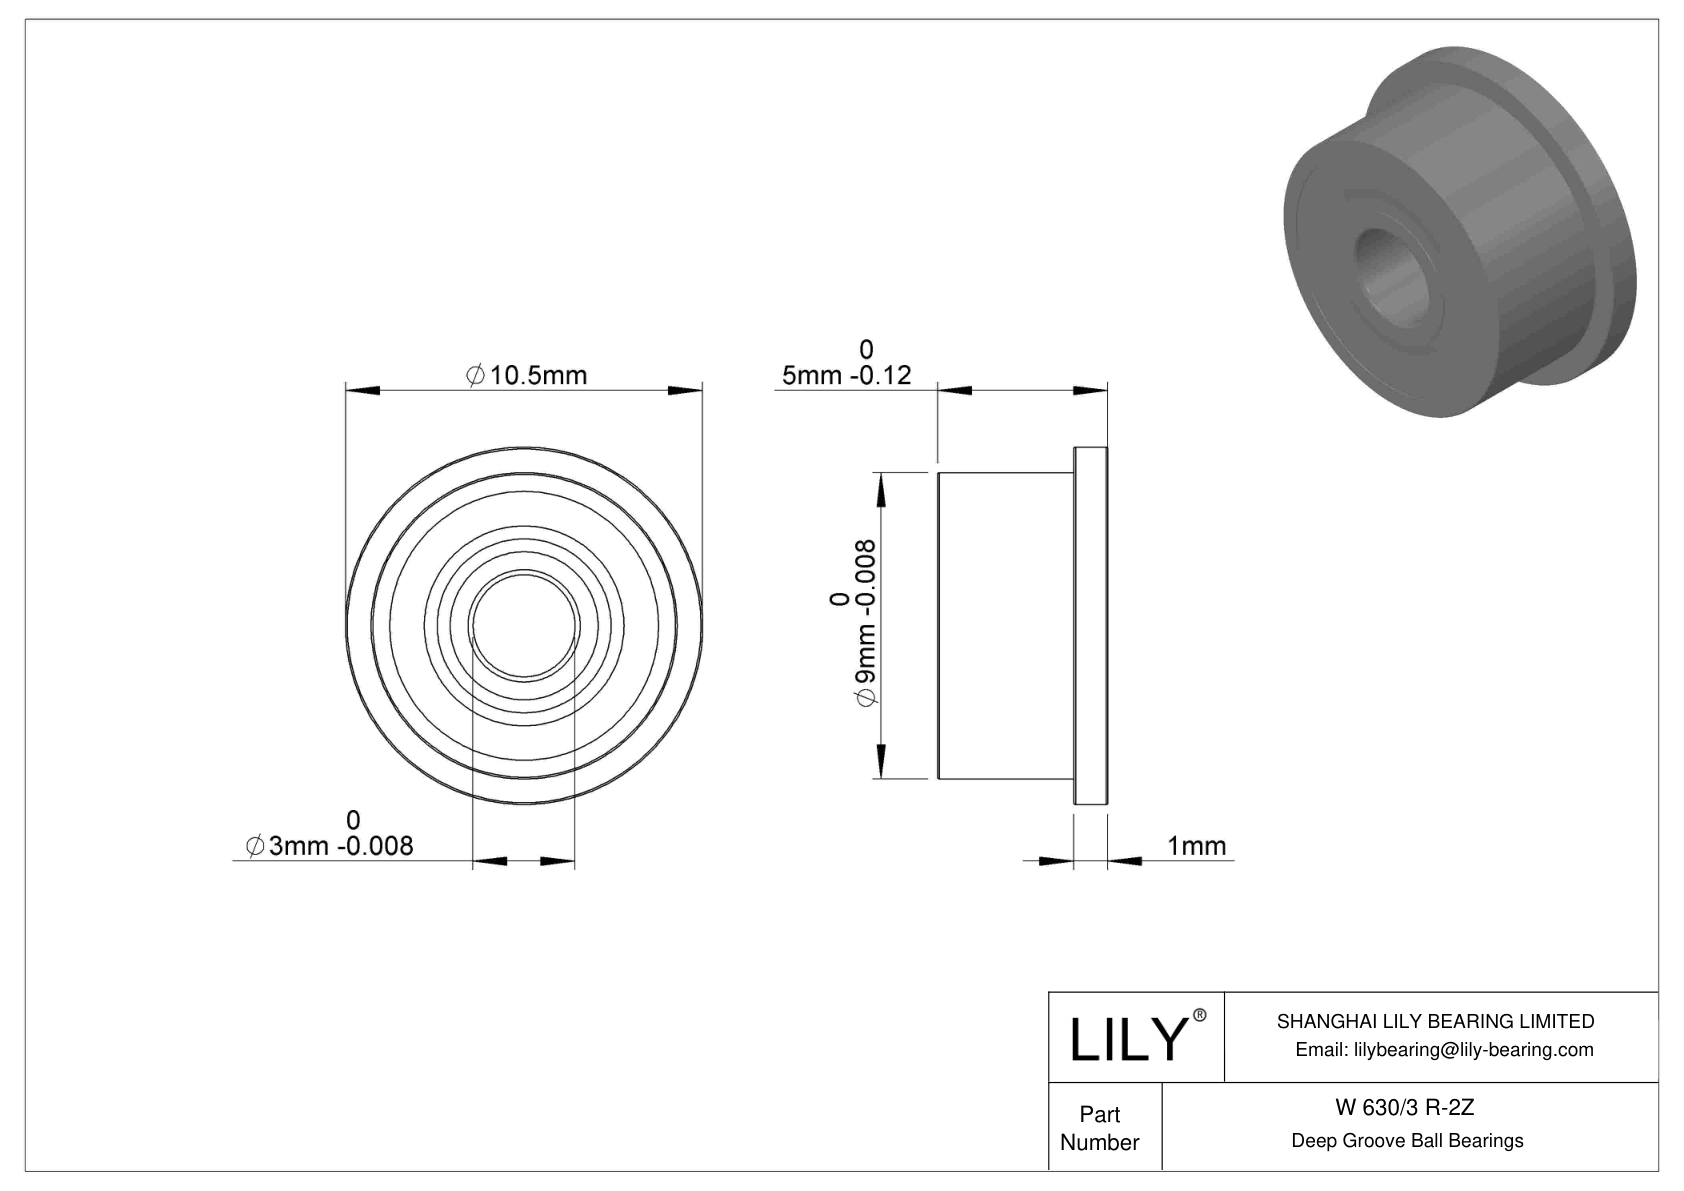 W 630/3 R-2Z Flanged Ball Bearings cad drawing